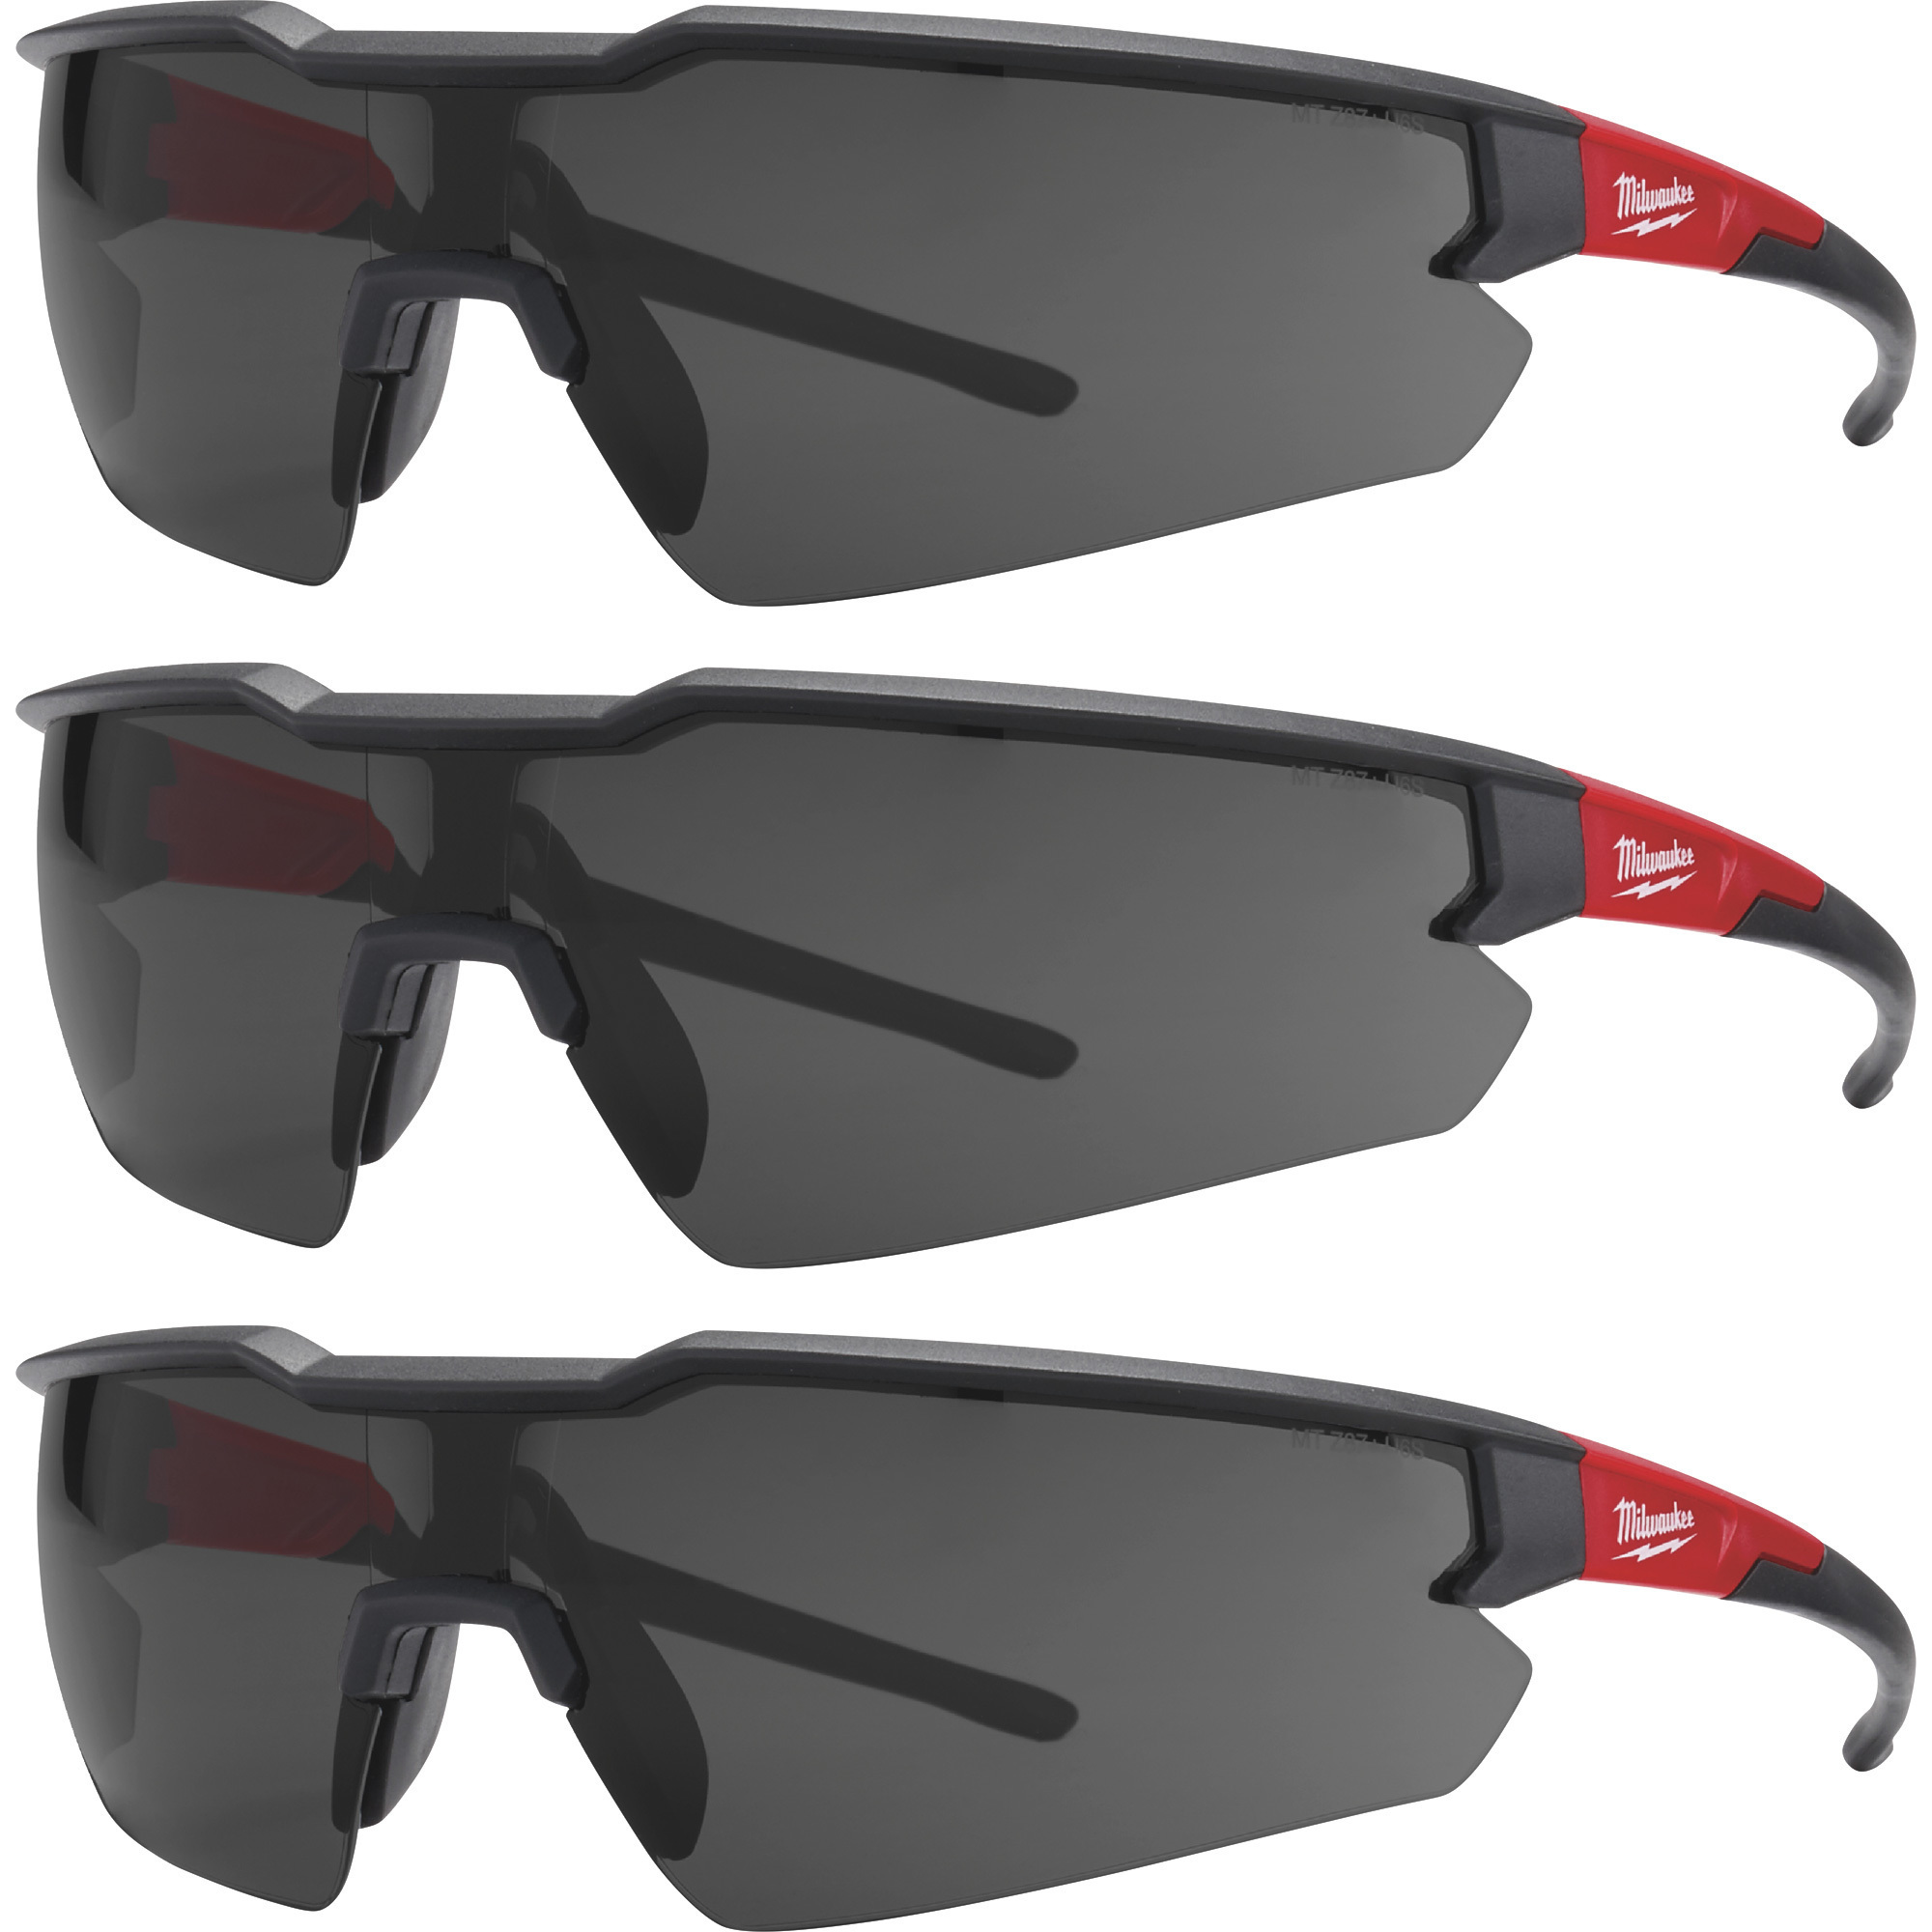 Milwaukee Anti-Scratch Safety Glasses, 3-Pack, Tinted Lenses, Black/Red Frames, Model 48-73-2054